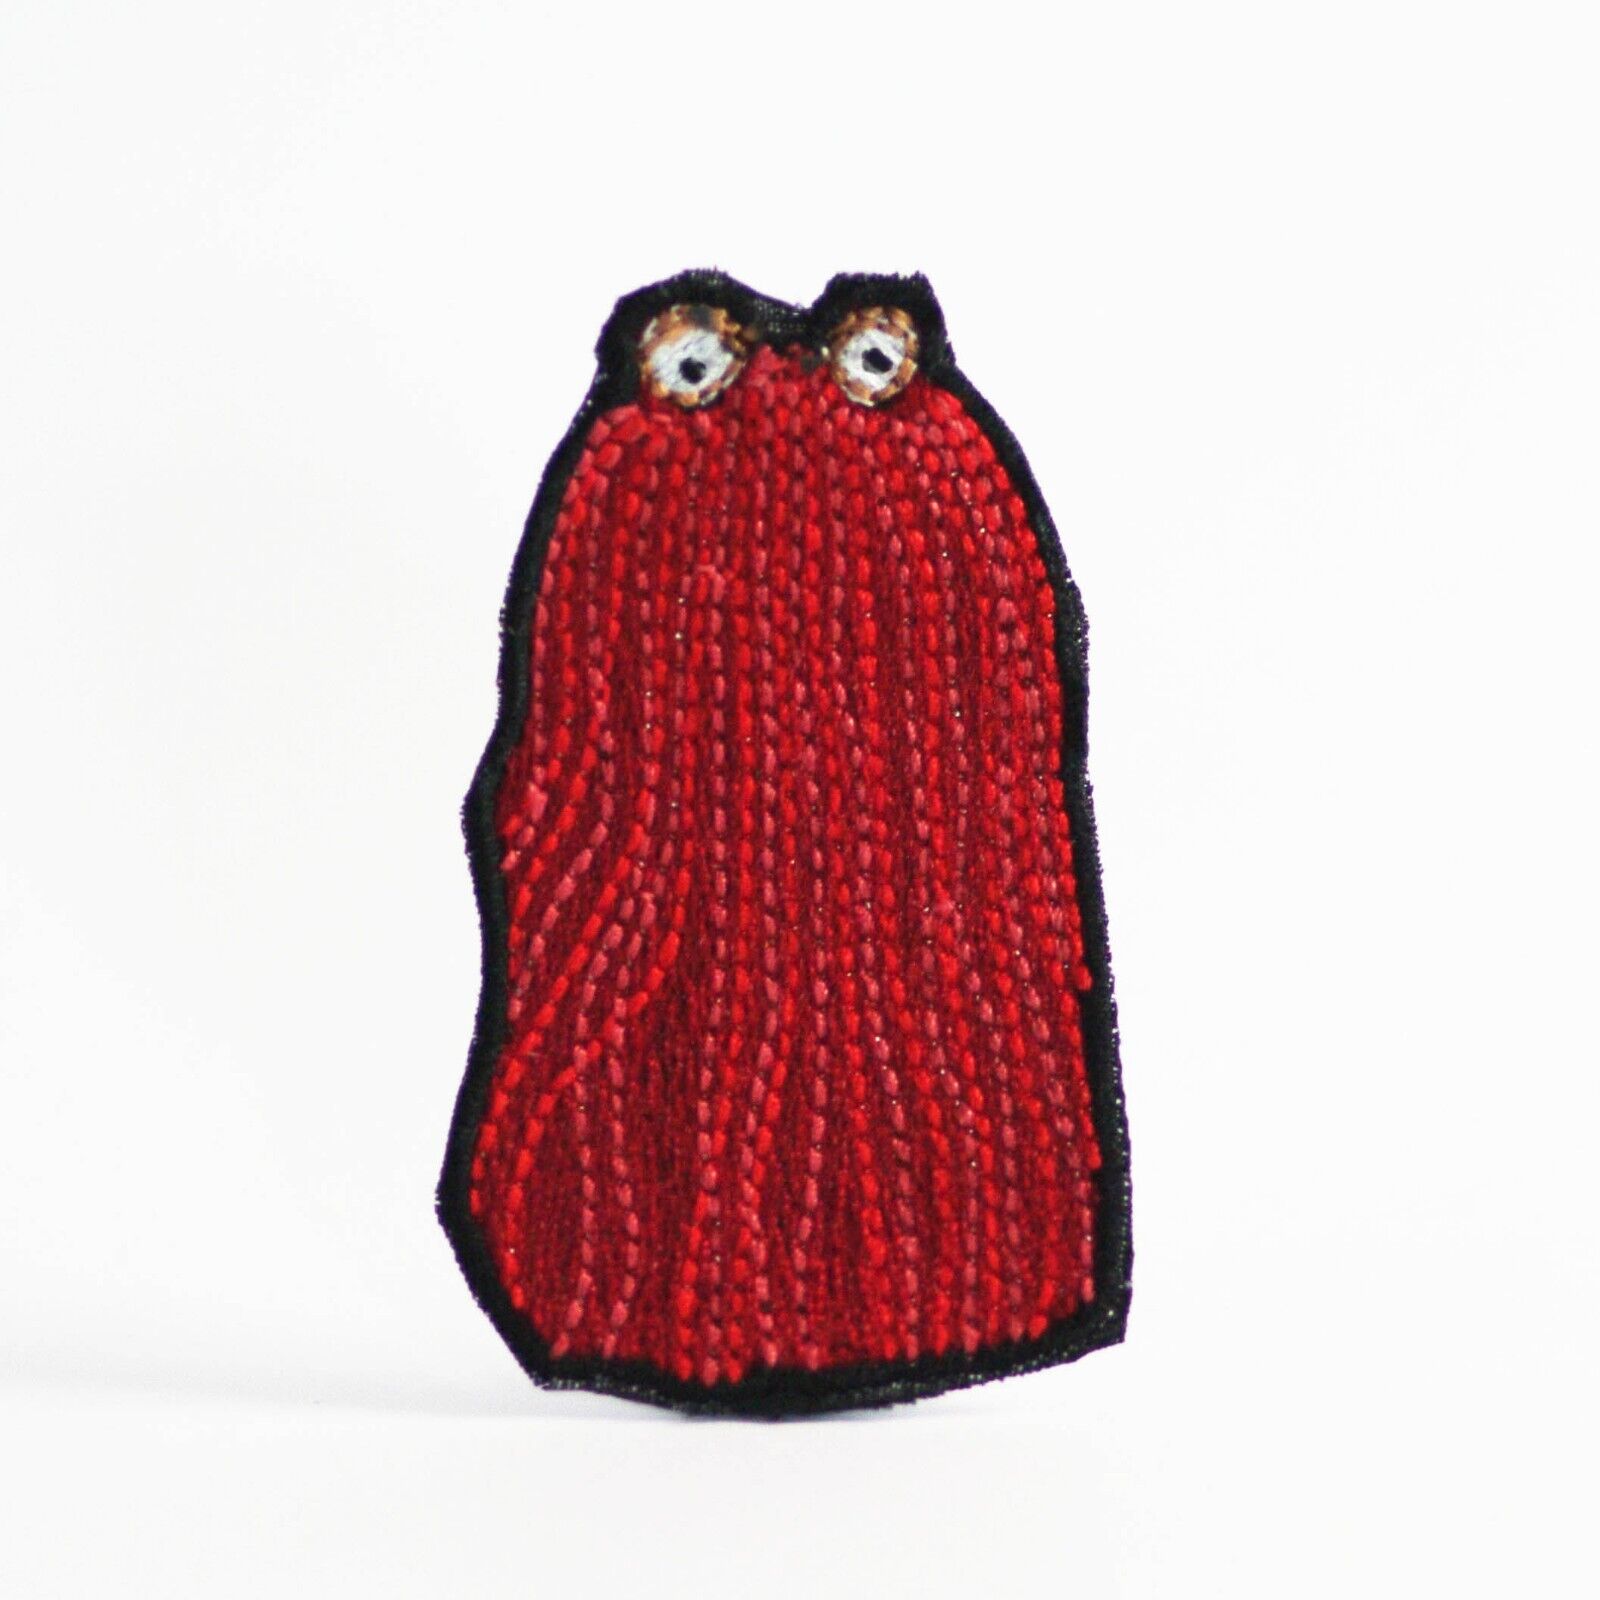 Don't Hug Me I'm Scared - Red Guy embroidered patch. Sew/Iron on. 5.1cm x 8.5cm